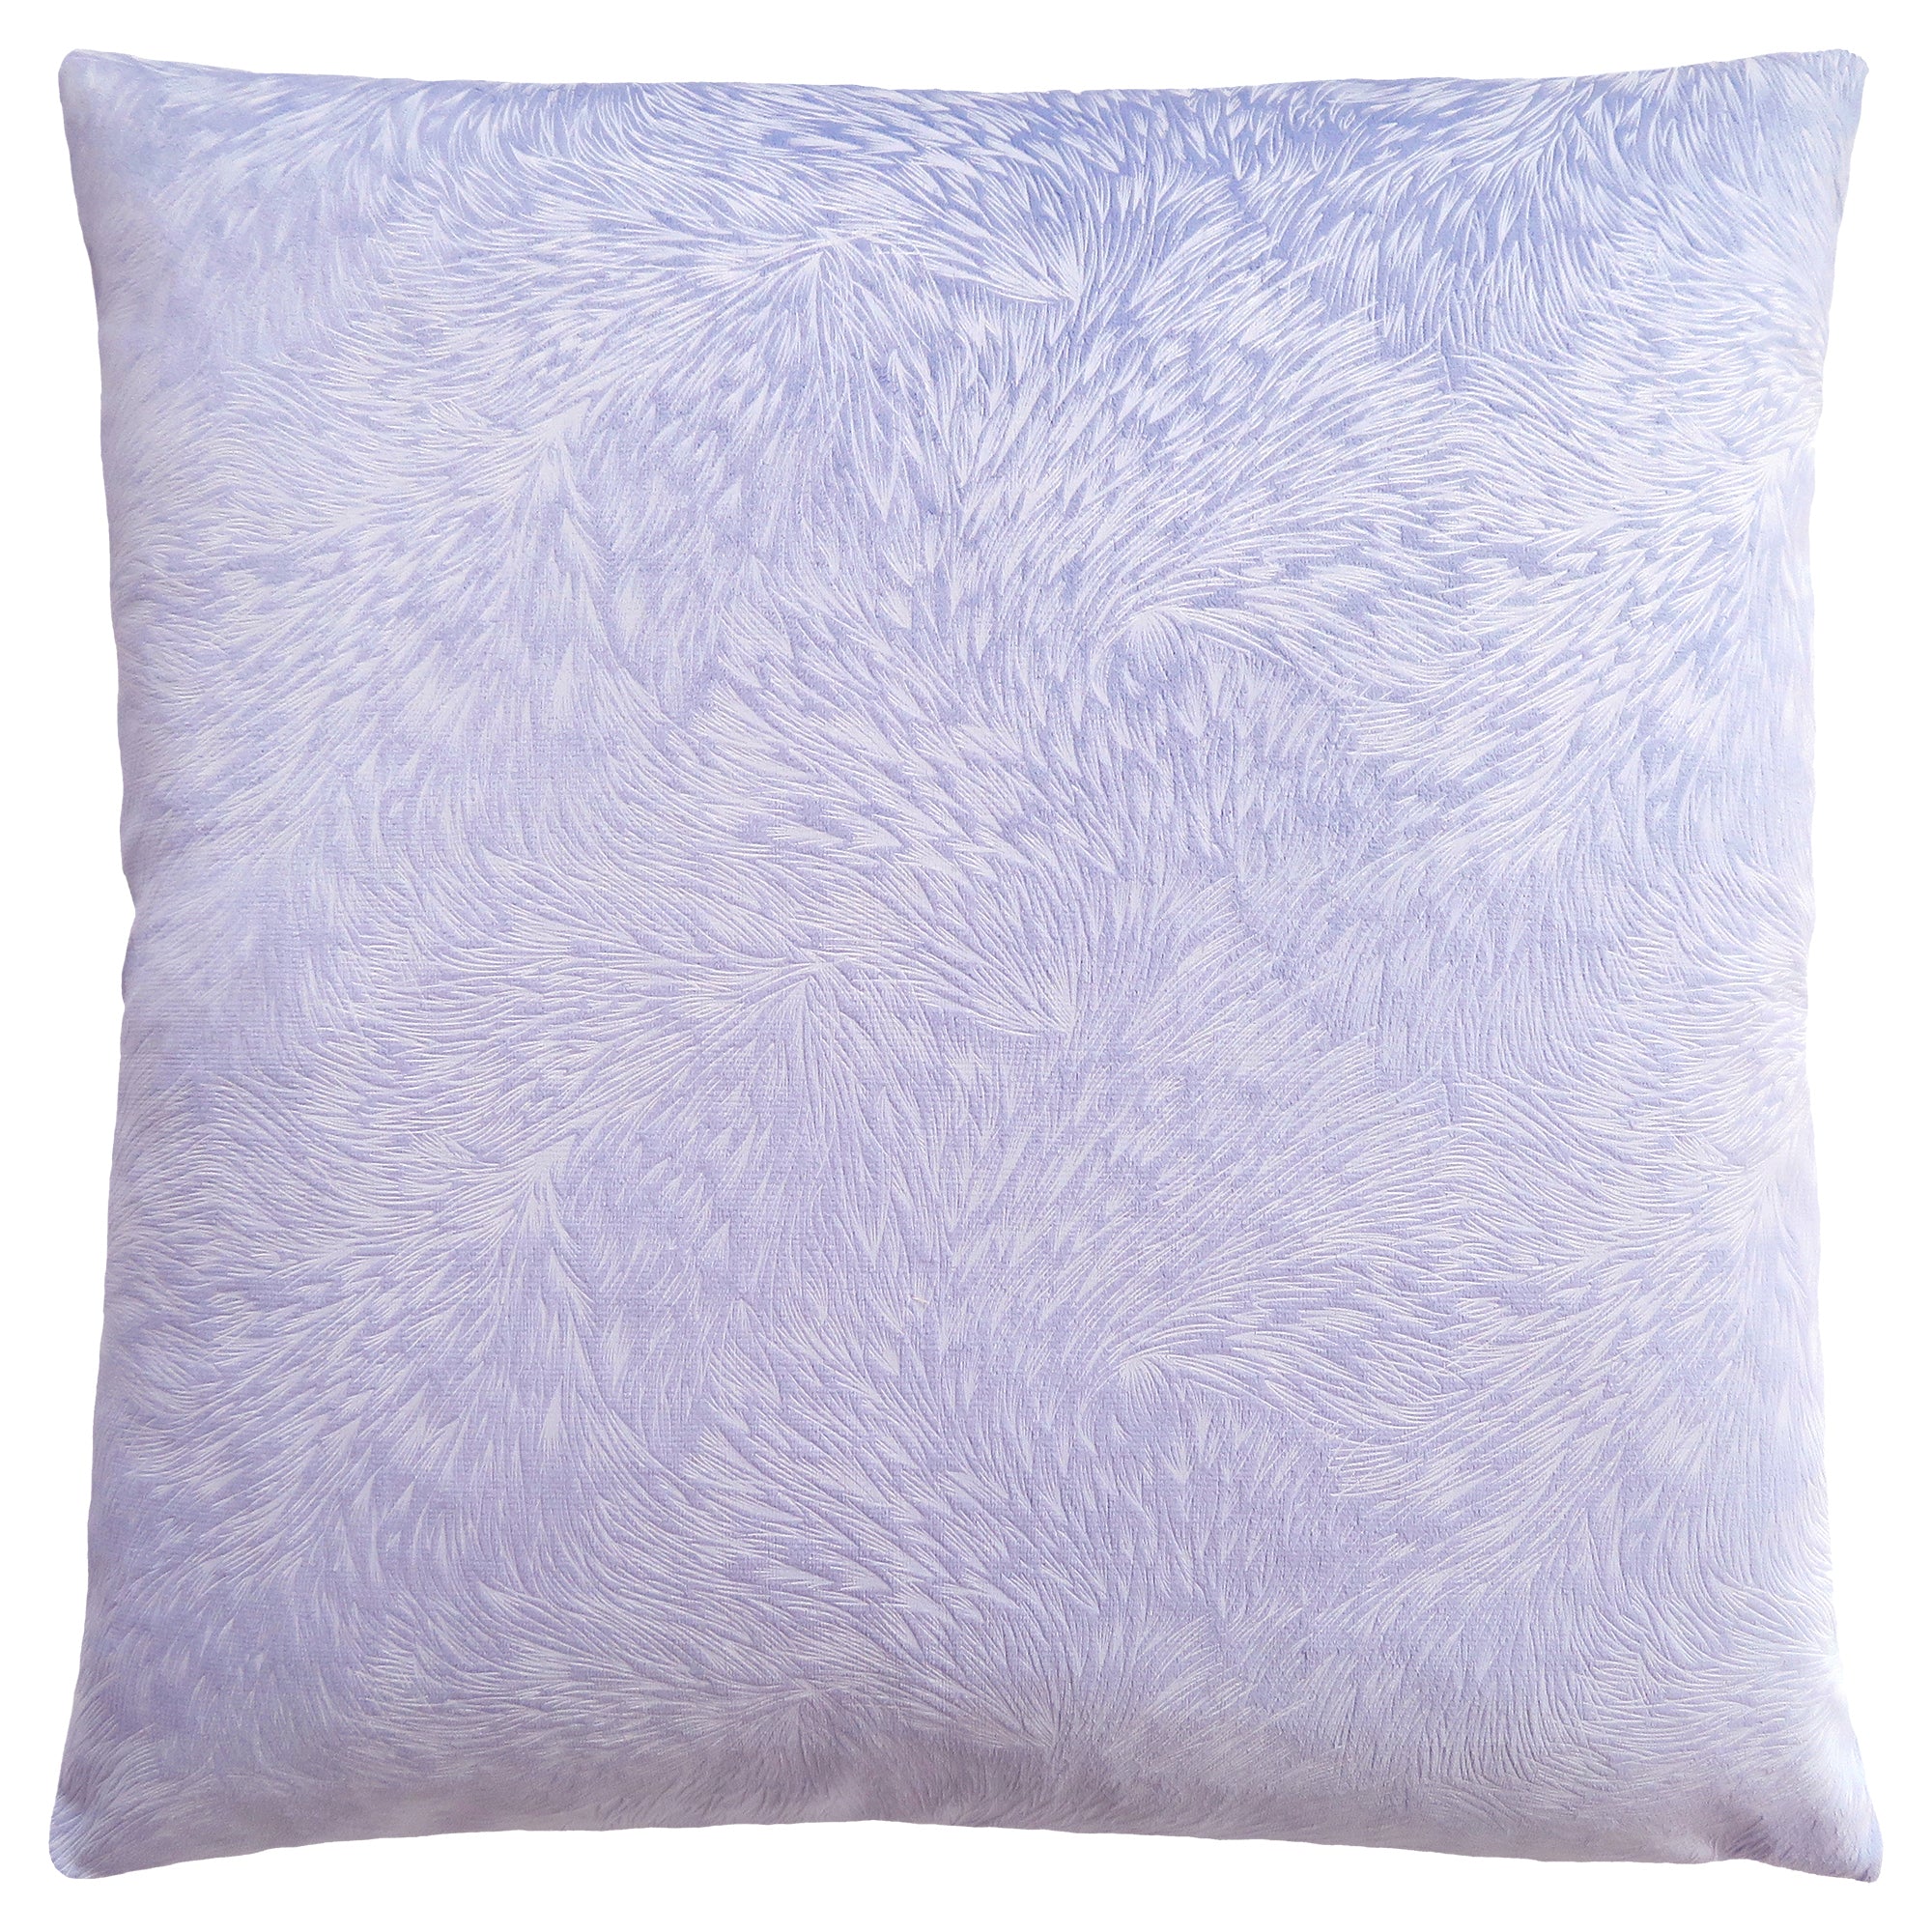 PILLOW - 18"X 18" / LIGHT TAUPE FEATHERED VELVET / 1PC